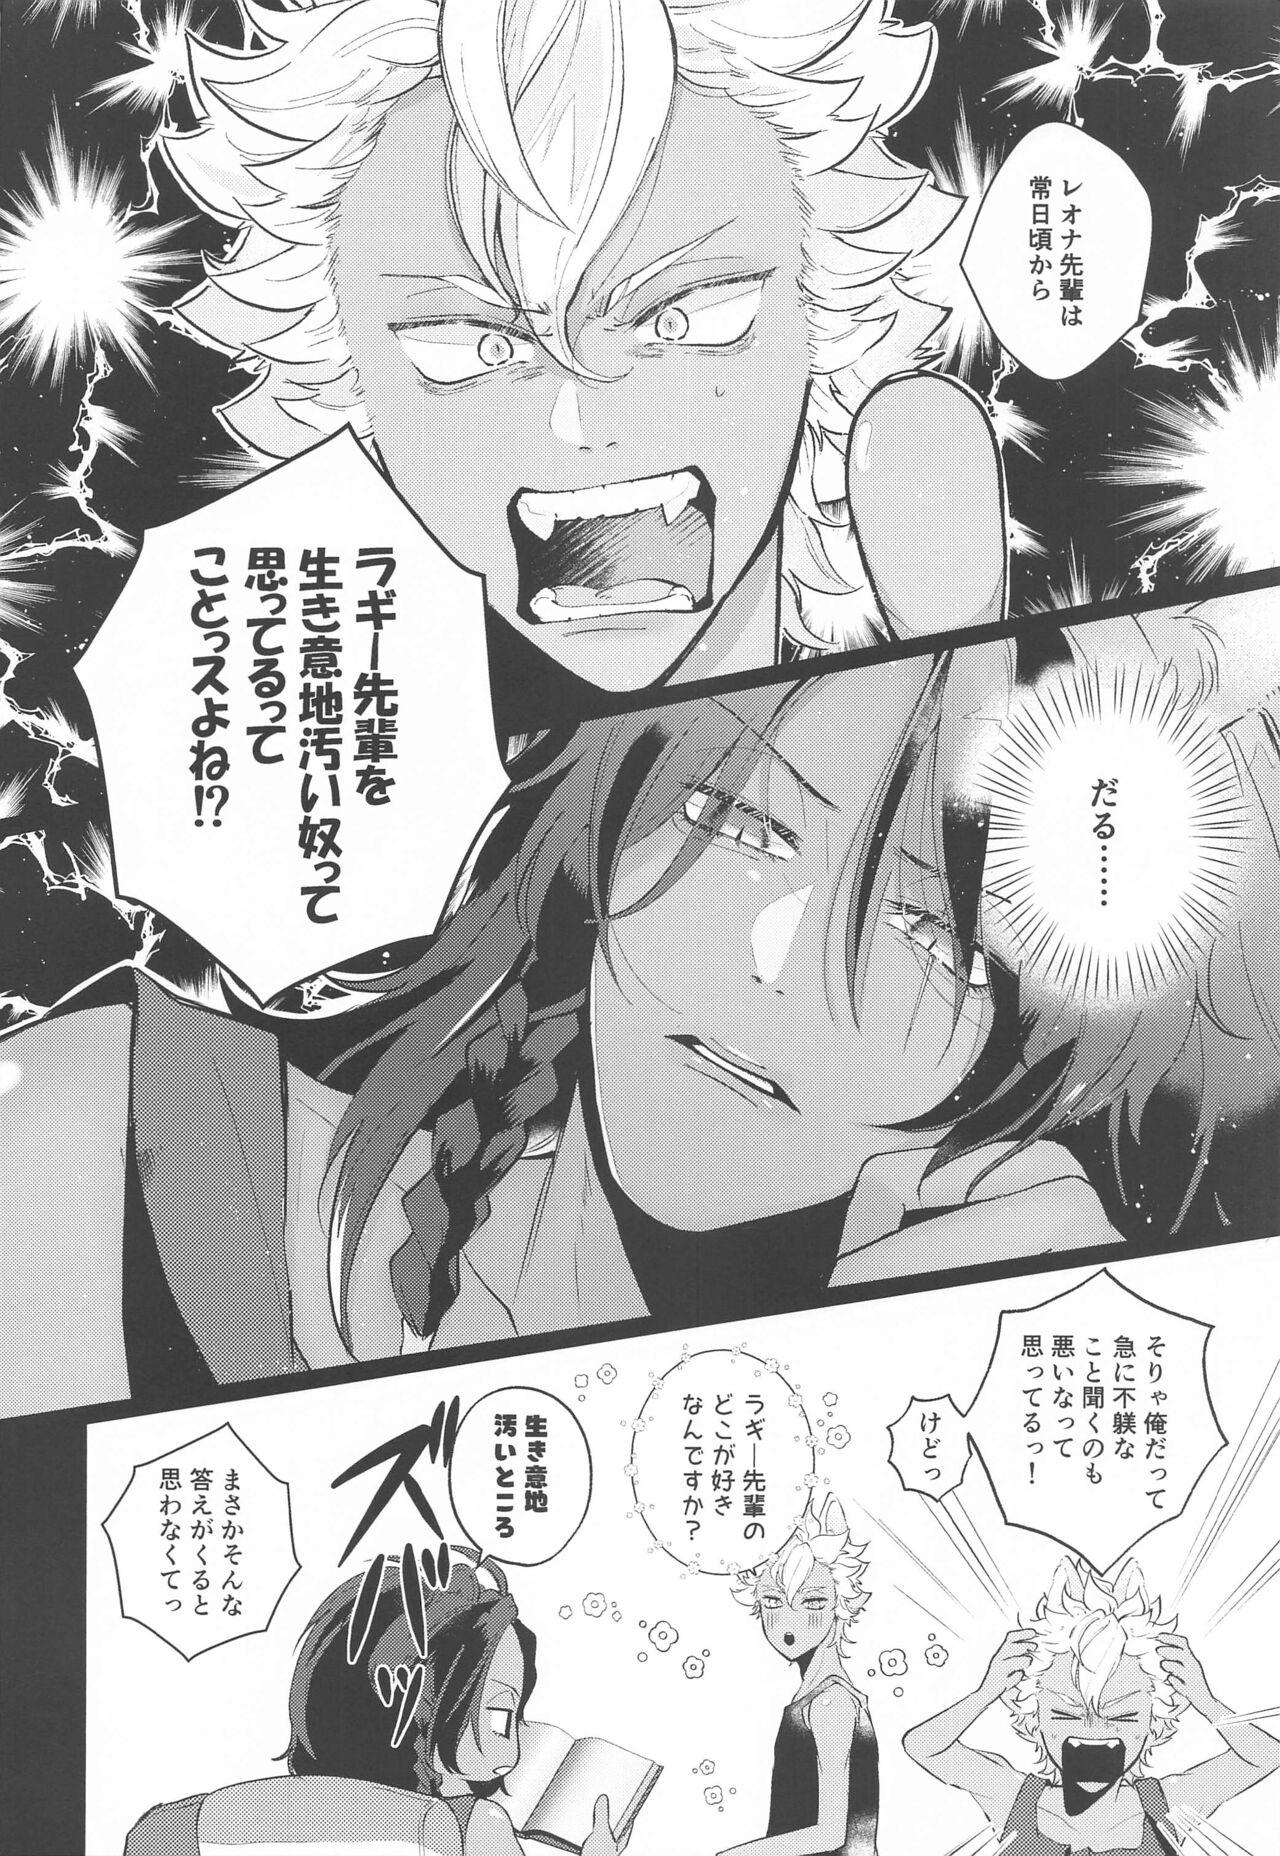 Gorgeous Kanchigai Over Run!! - over run from a misunderstanding - Disney twisted-wonderland Fisting - Page 3